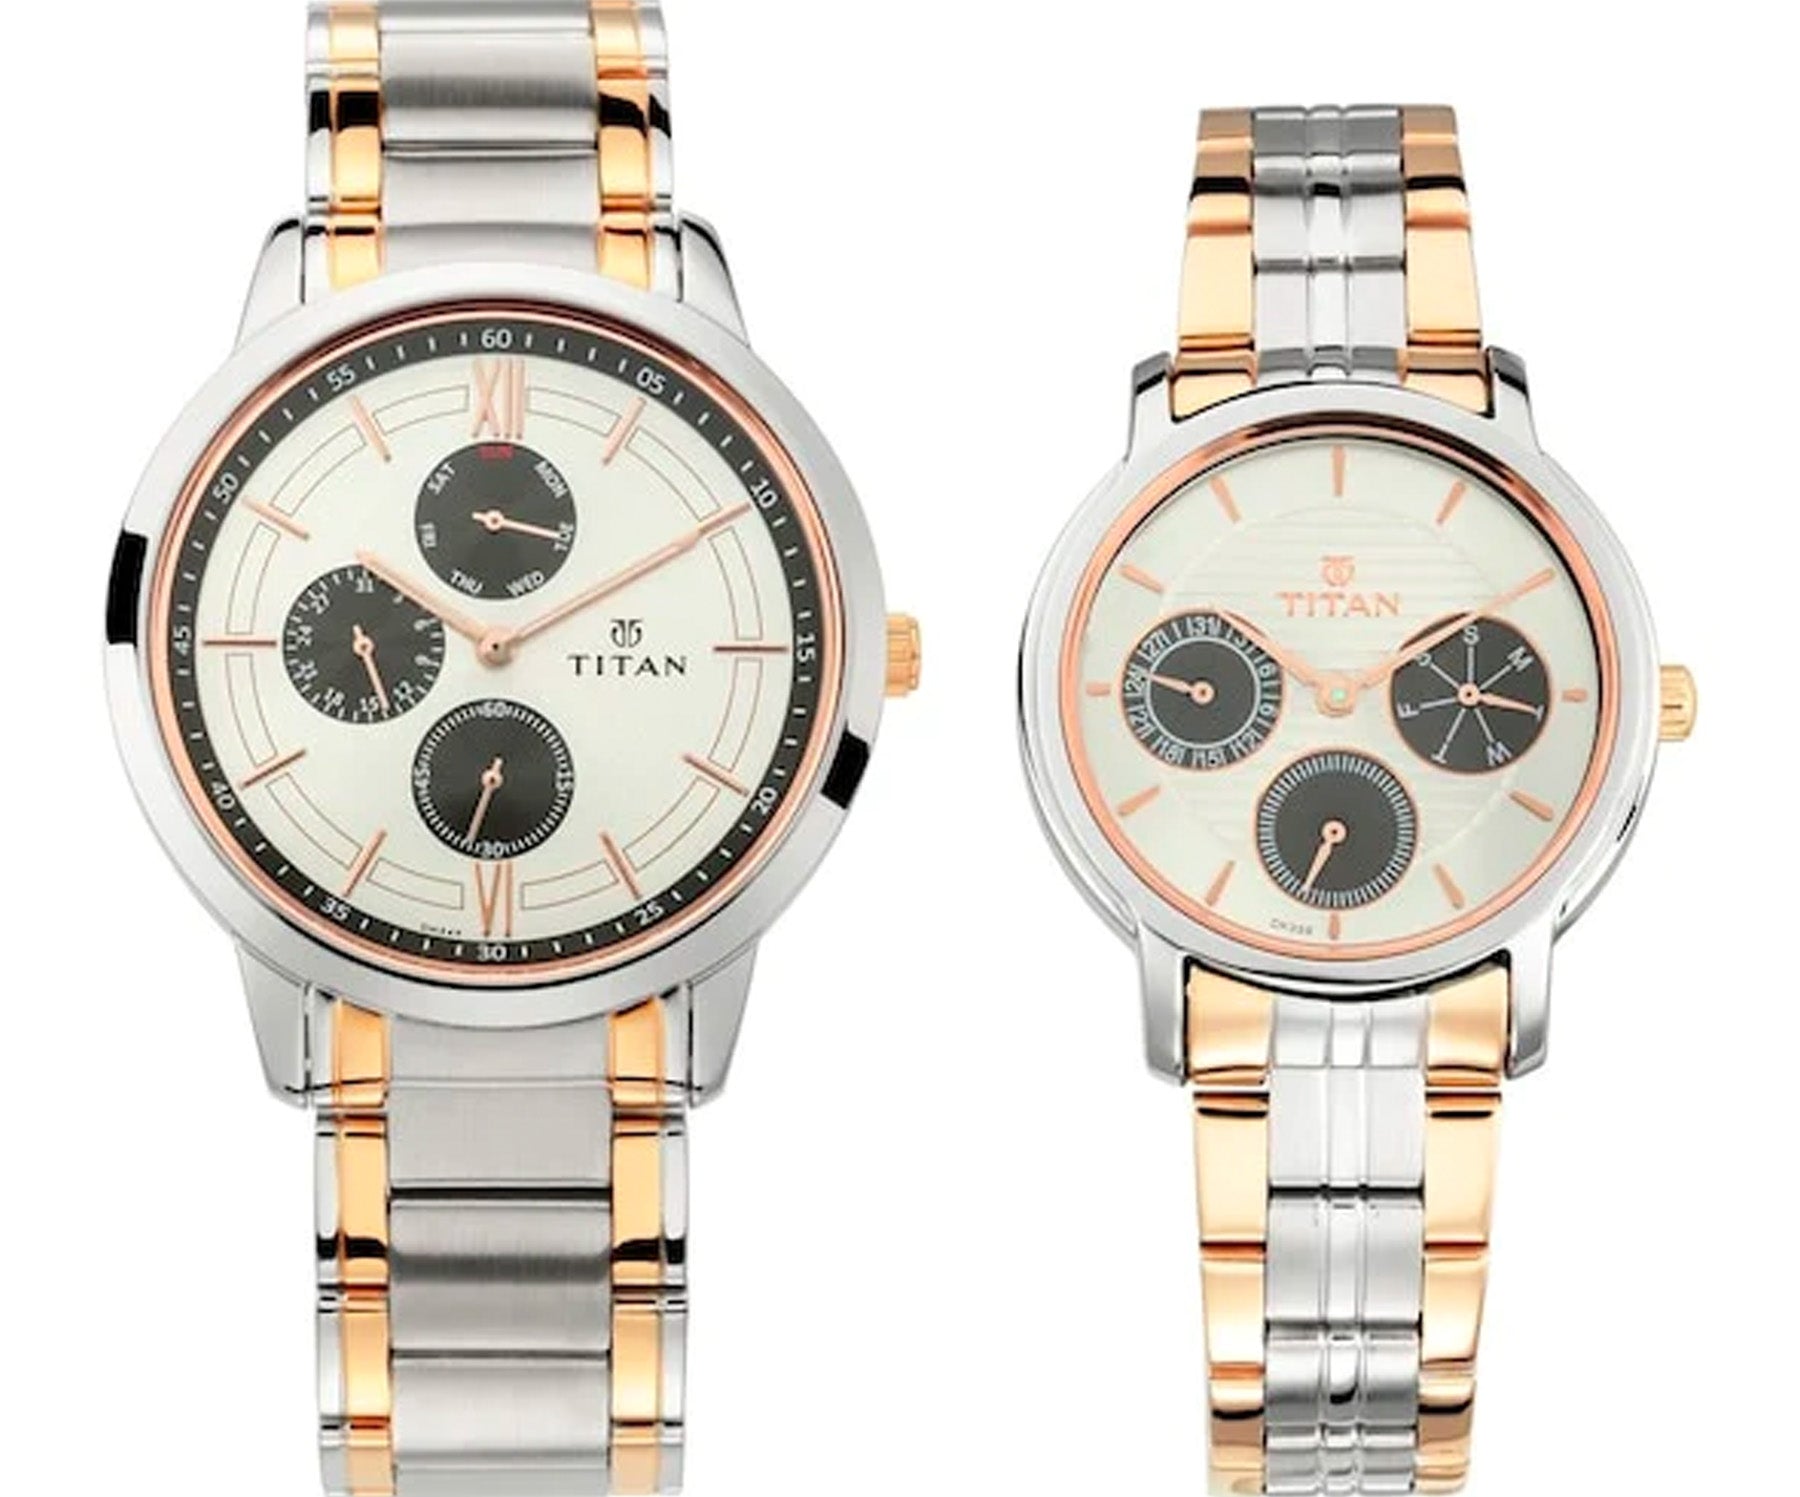 Titan Couple's Watch Classique Collection Analog, Silver Dial Silver & Gold Stainless Strap, 1769KM01P